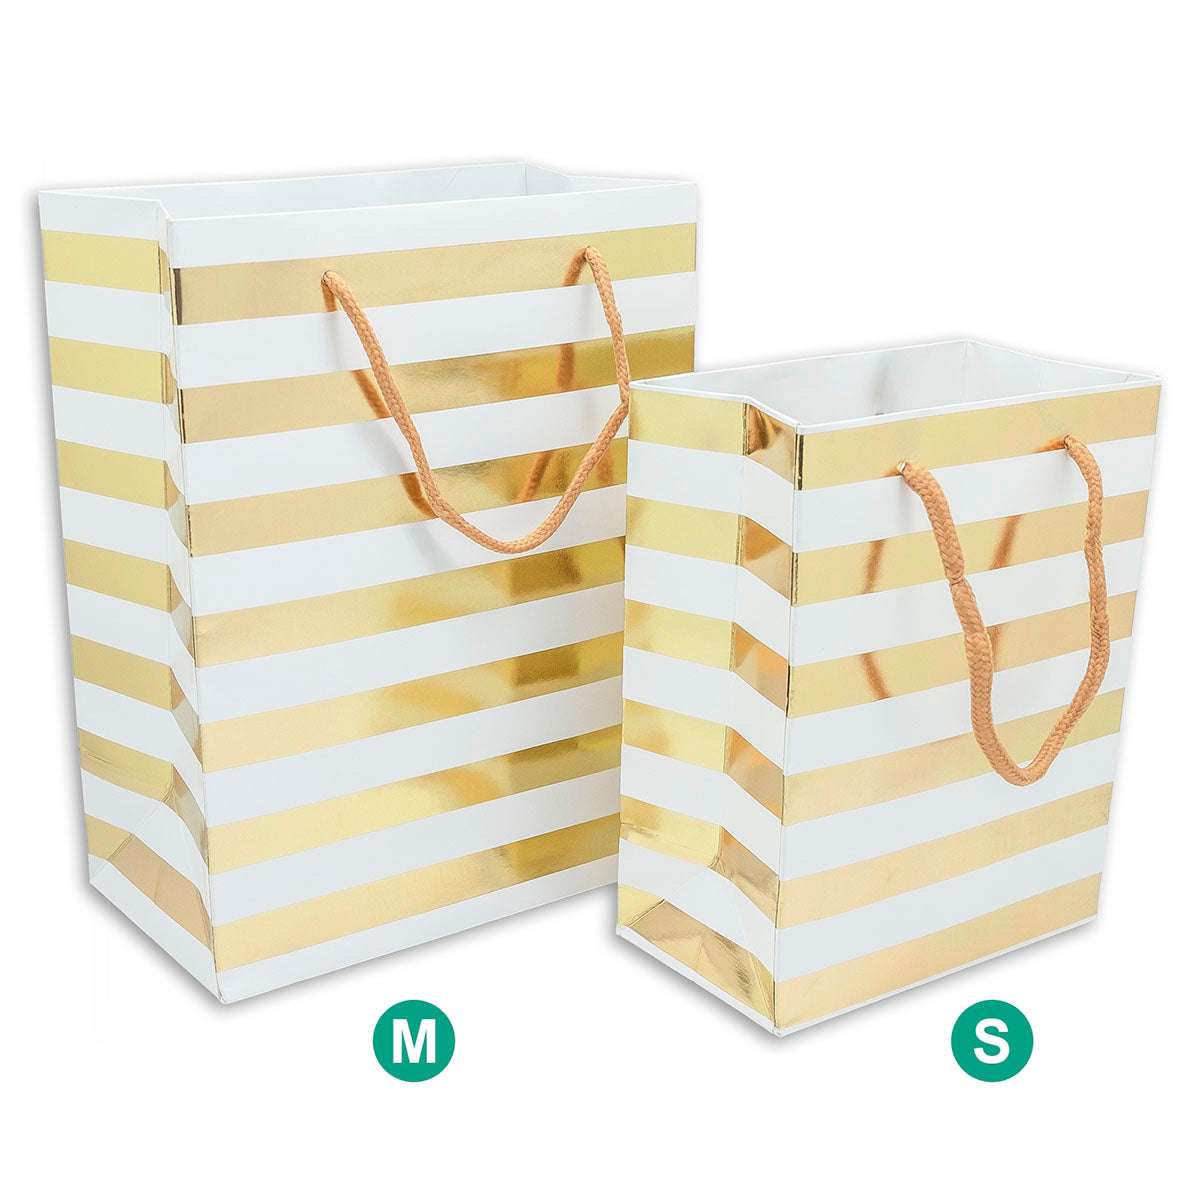 White and Gold Striped Gift Bags (12-Pack)